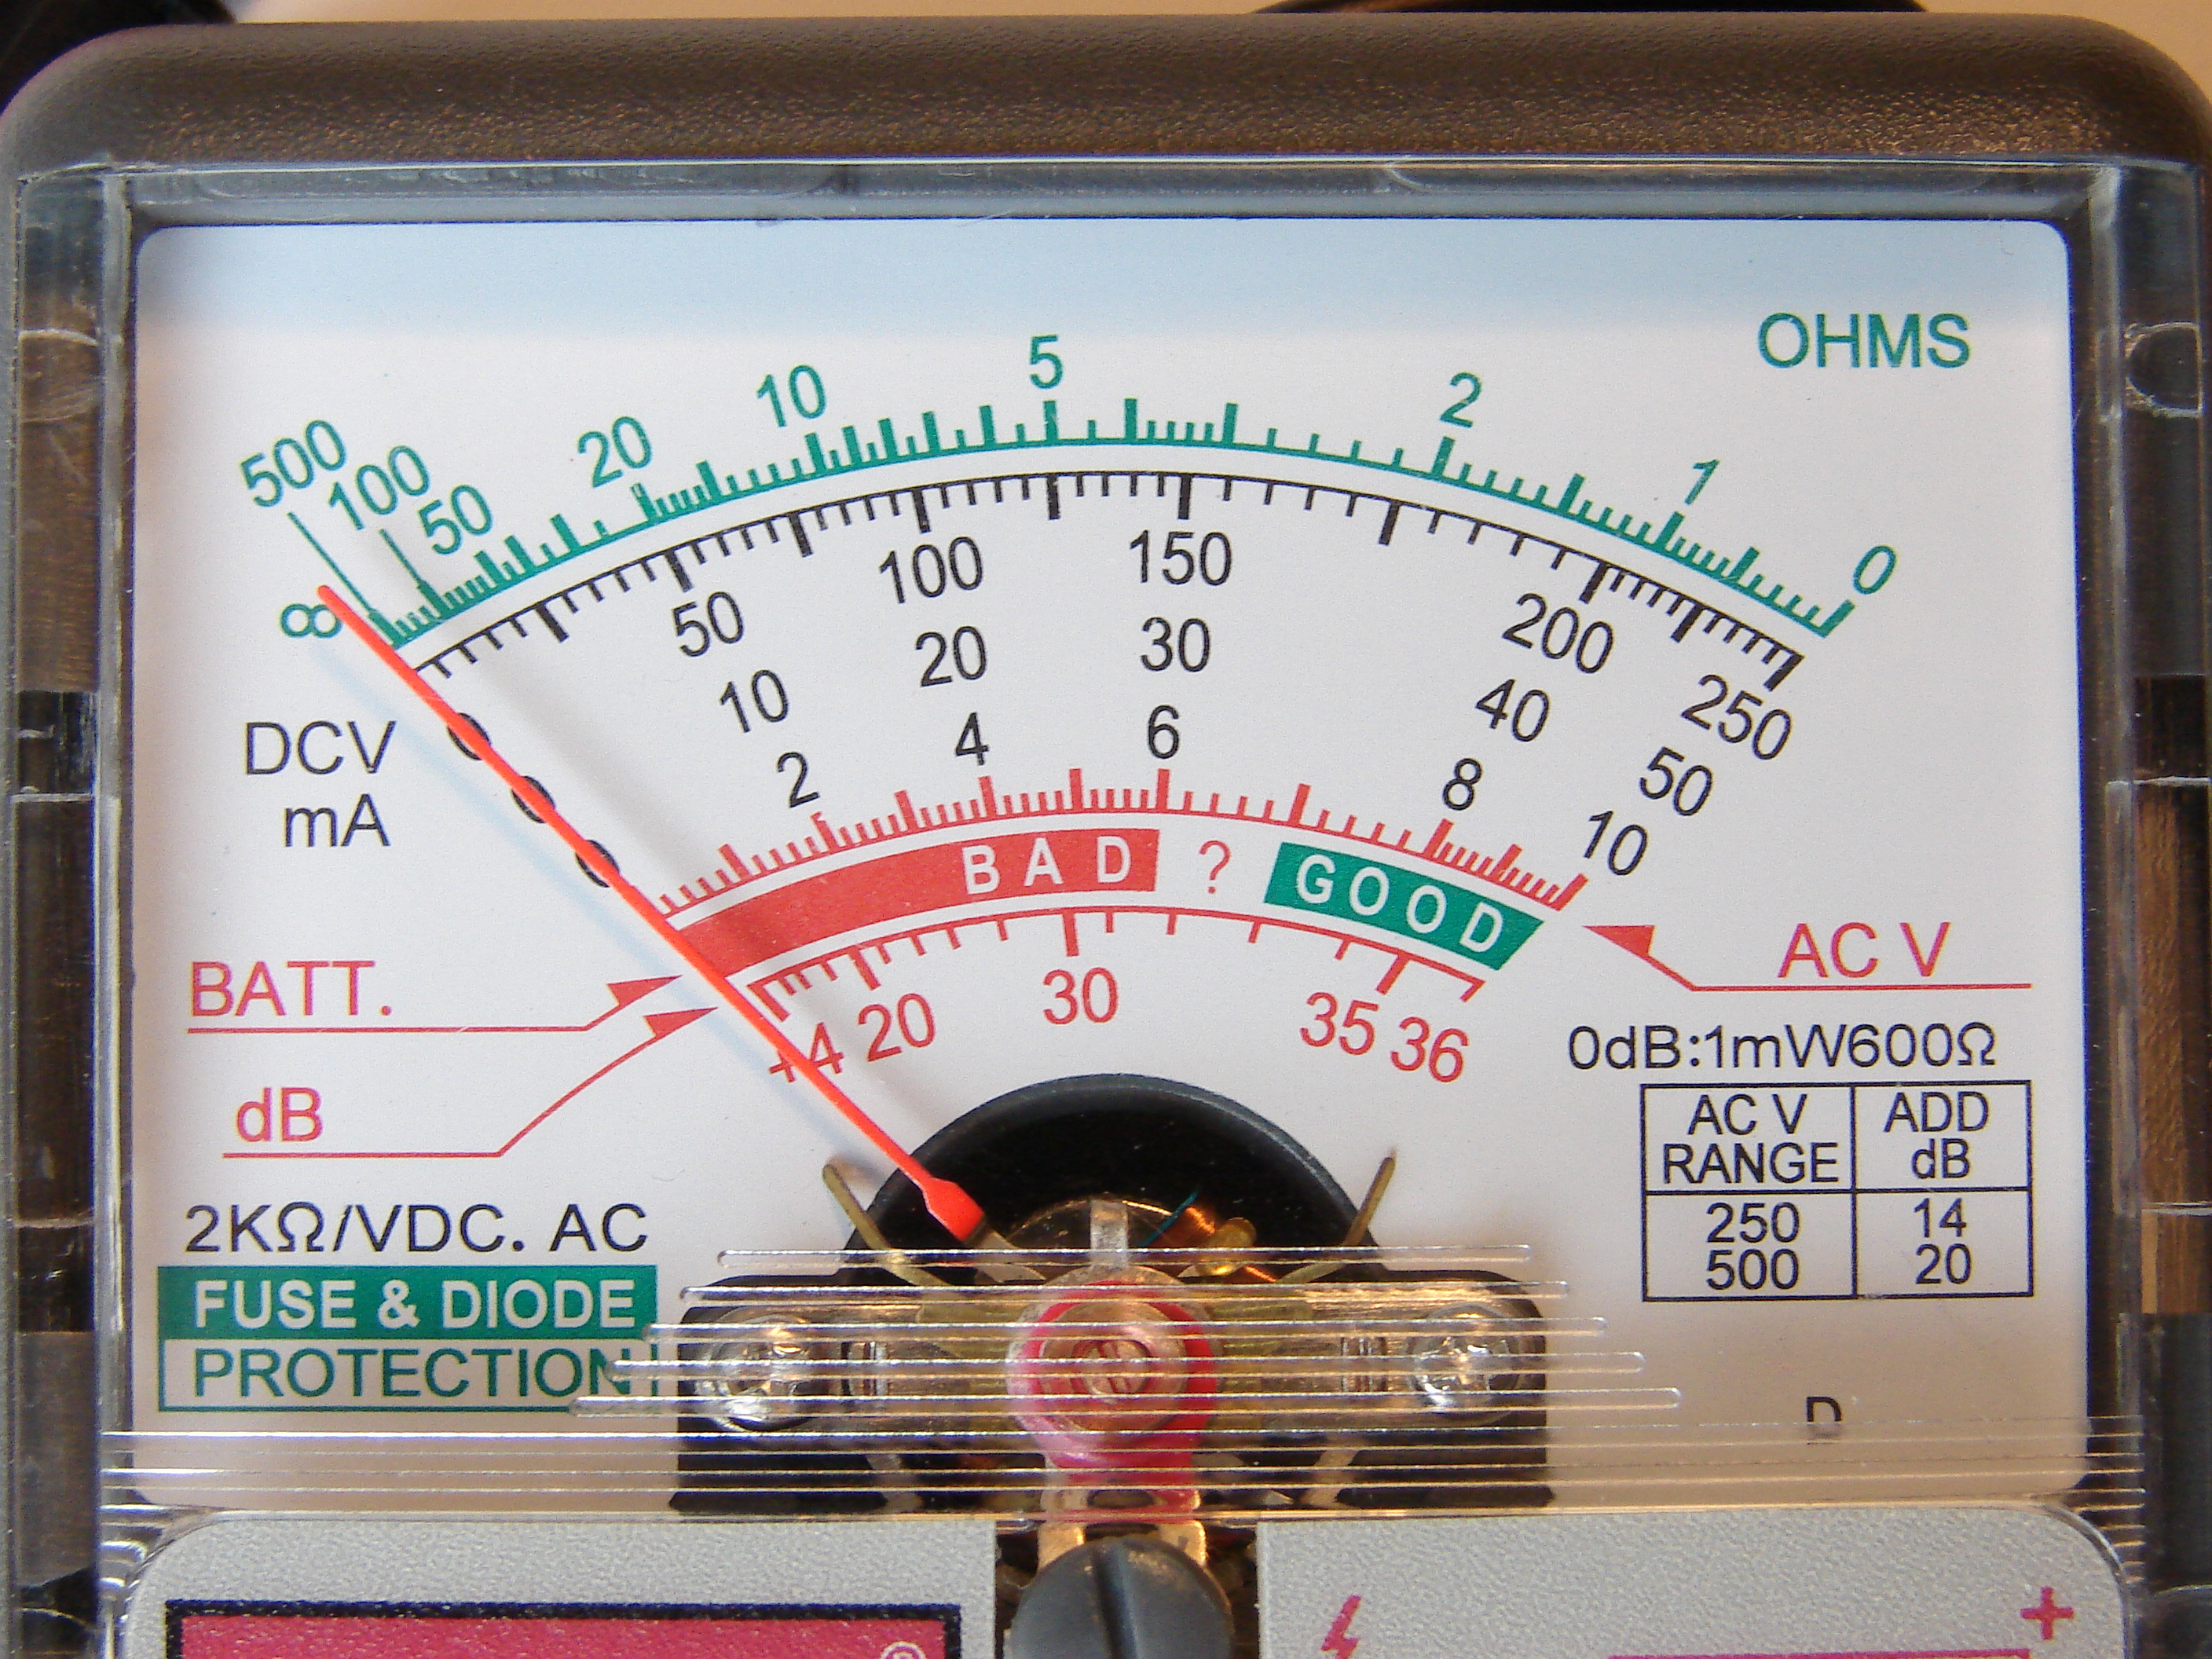 VOMS: Analog Volt-Ohm Meters: how to choose & Use a VOM to Detect